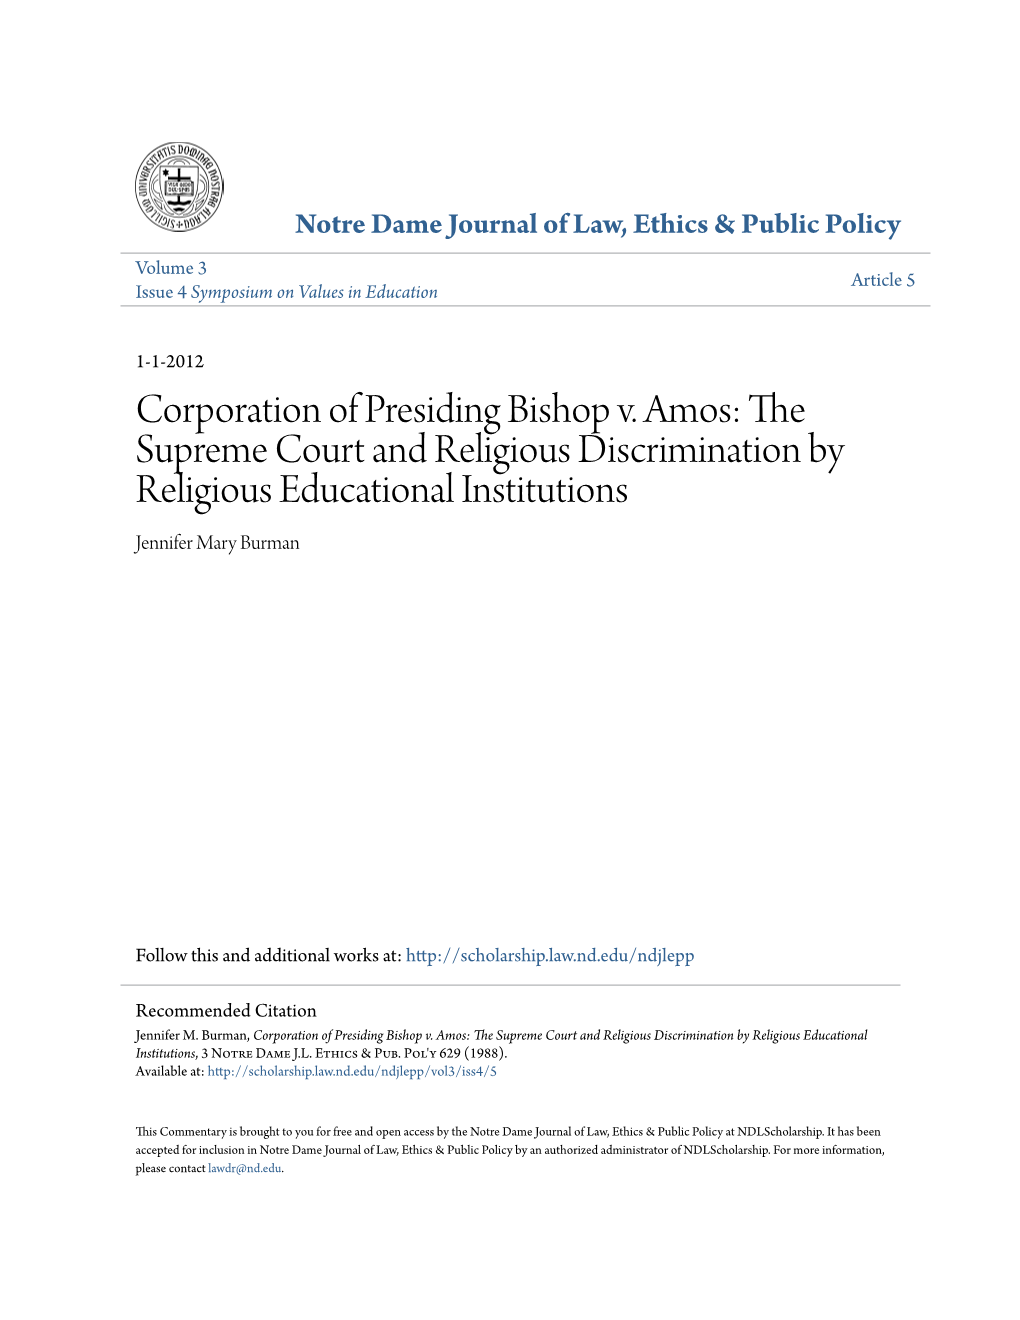 Corporation of Presiding Bishop V. Amos: the Supreme Court and Religious Discrimination by Religious Educational Institutions Jennifer Mary Burman